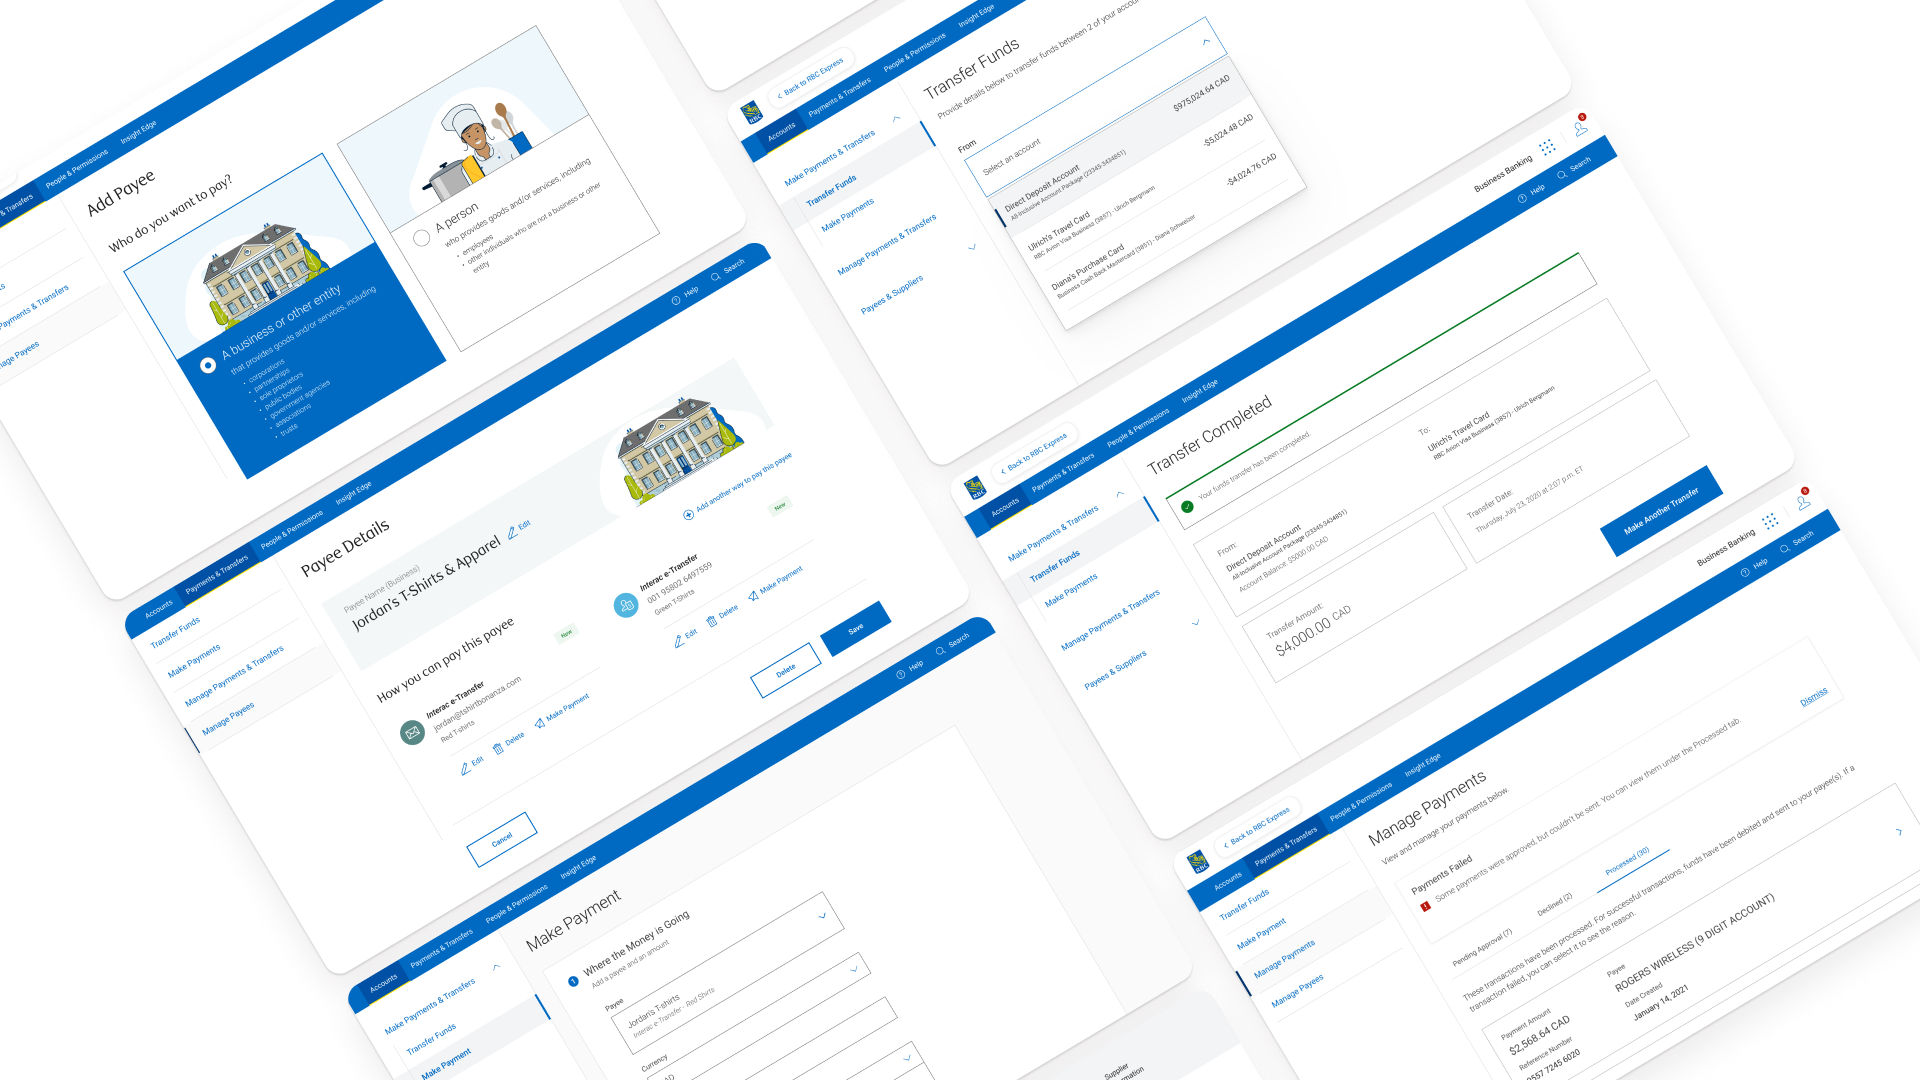 Image of desktop mockups of the new business banking experience